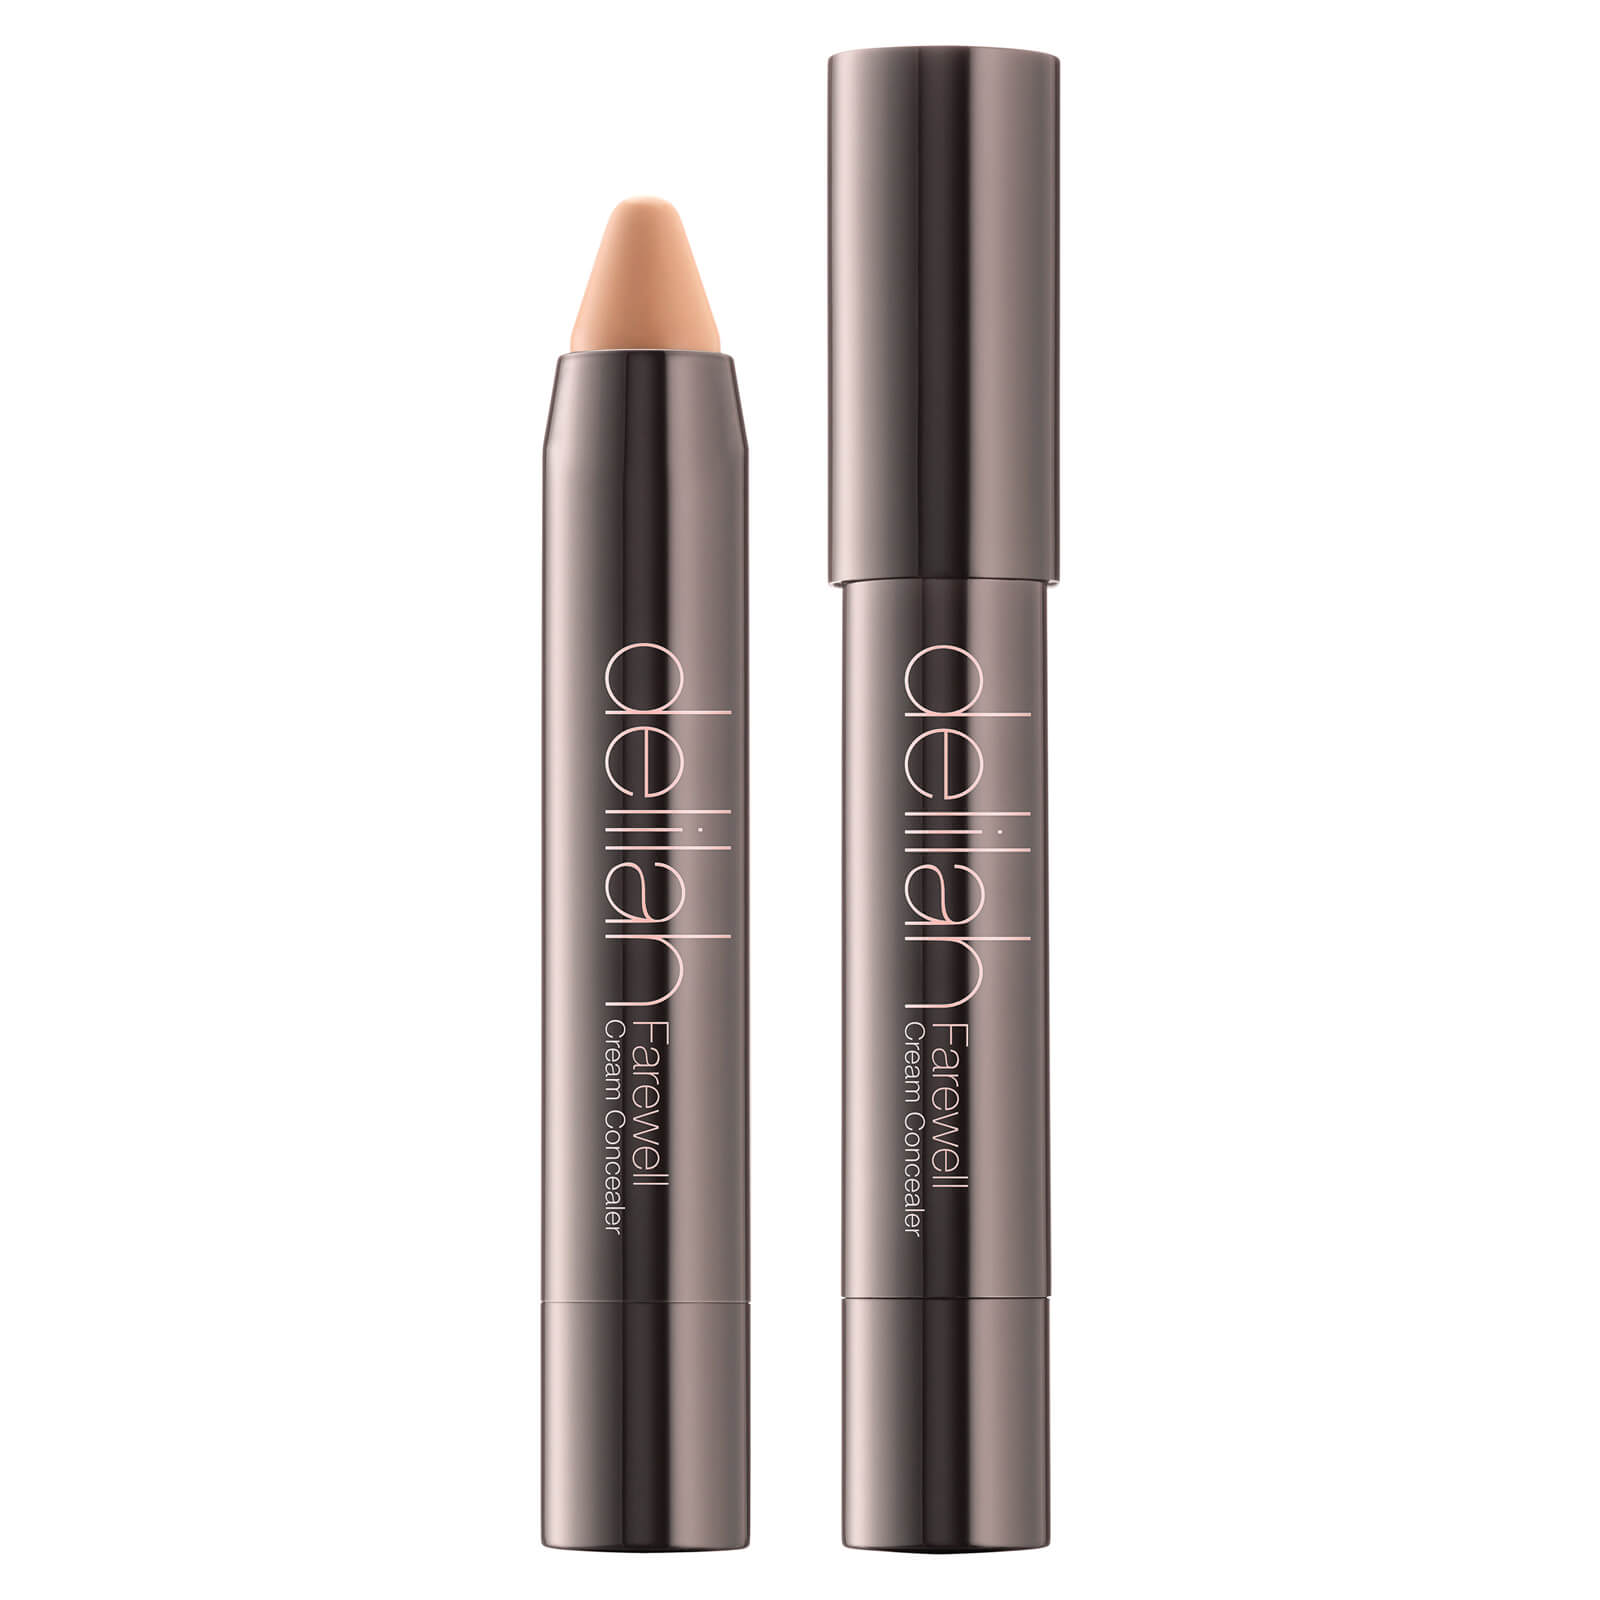 delilah Farewell Cream Concealer 3.8g (Various Shades) - Honey image